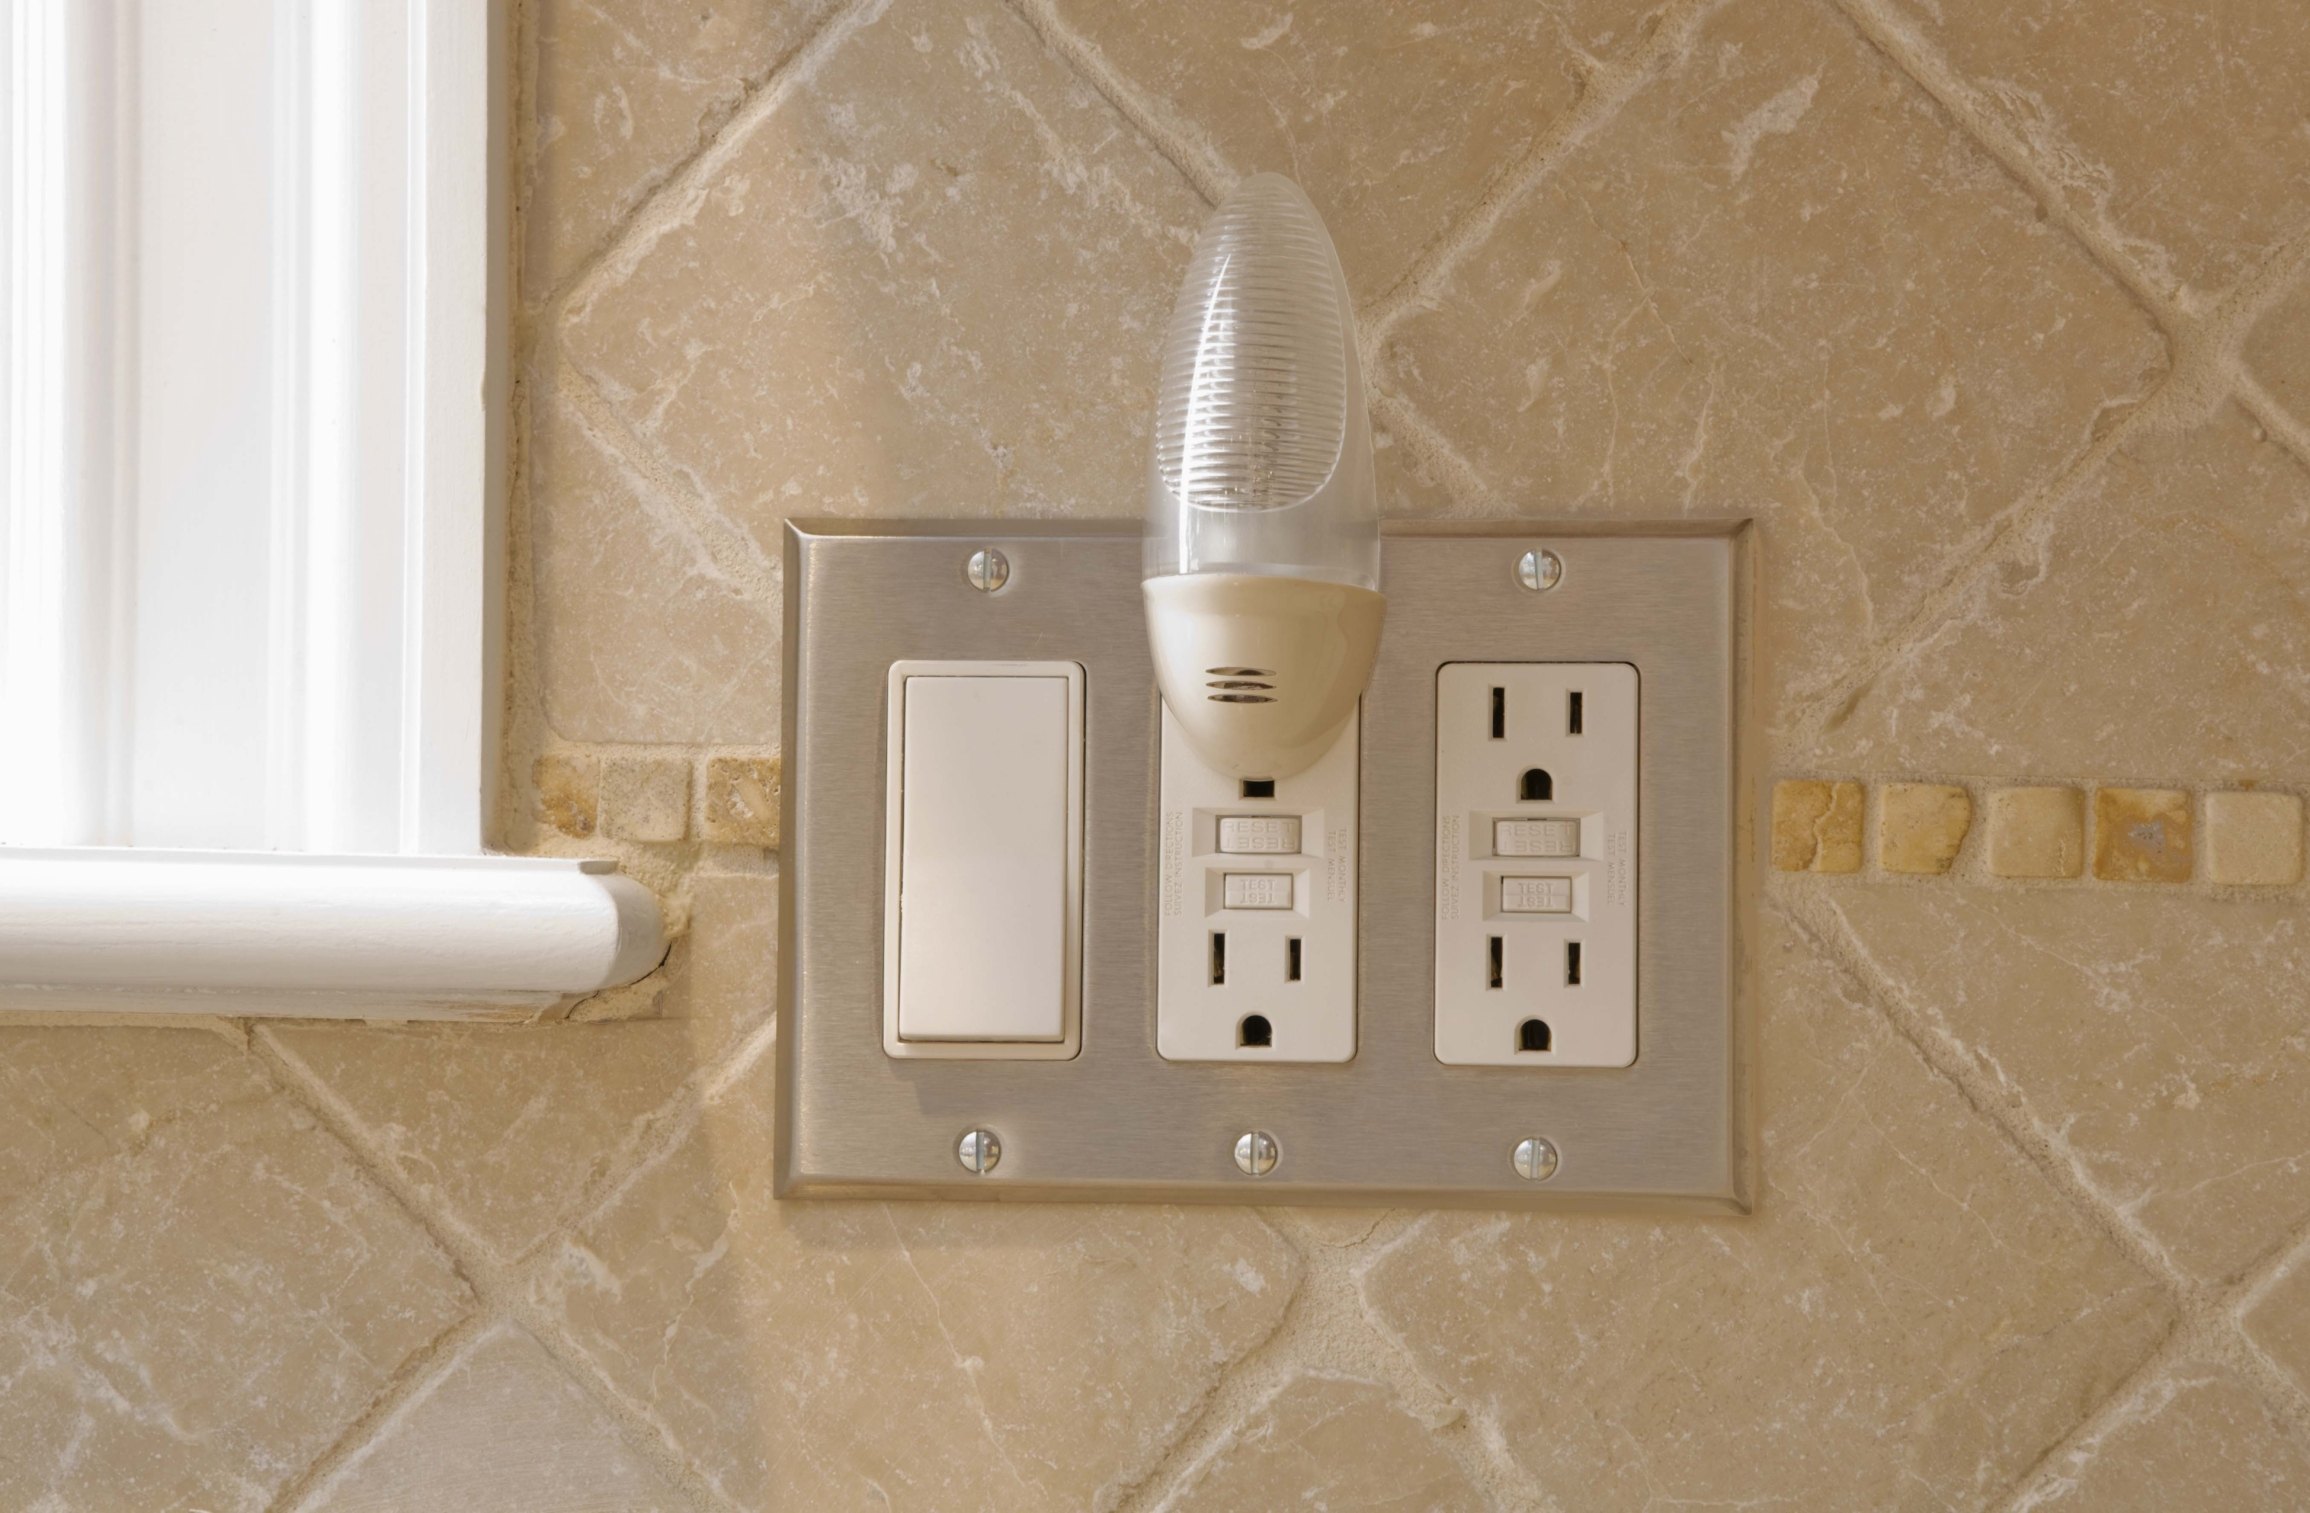 gfci outlet in kitchen